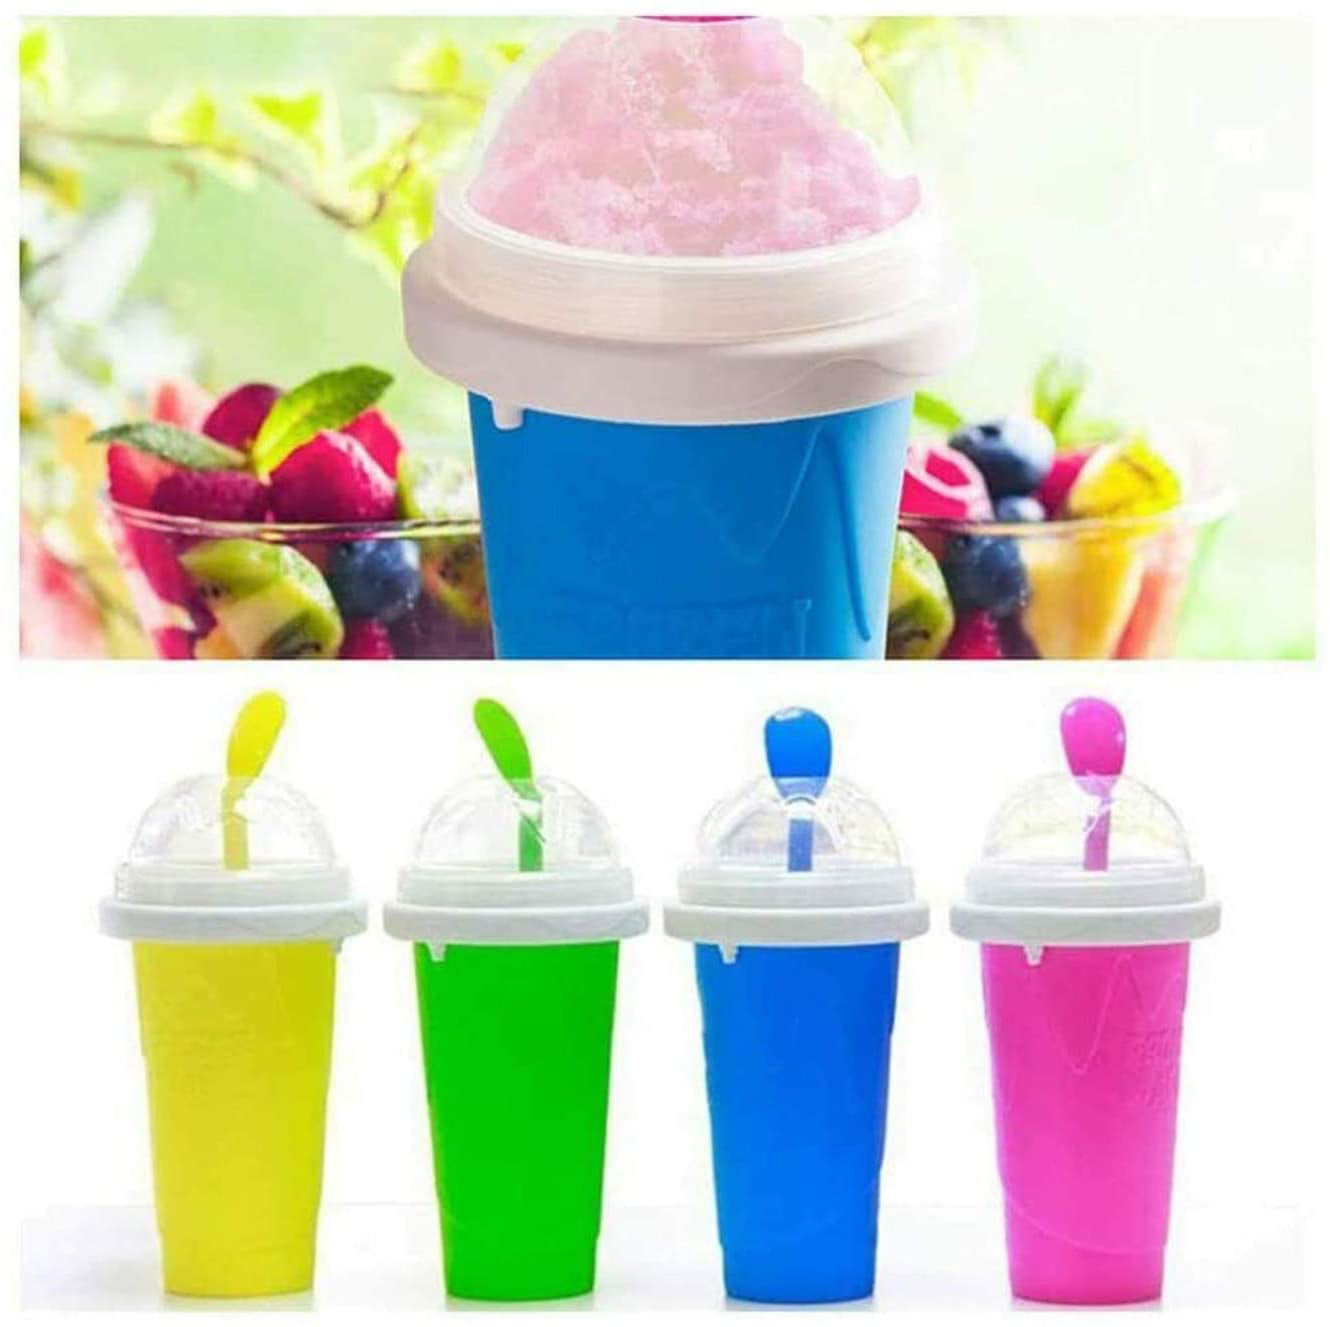 Magic Slushy Maker Squeeze Cup Slushy Maker DIY Homemade Smoothie Cups Freeze Drinks Cup Double Layer Summer Juice Ice Cream Cup for Children Fast Cooling Yellow 